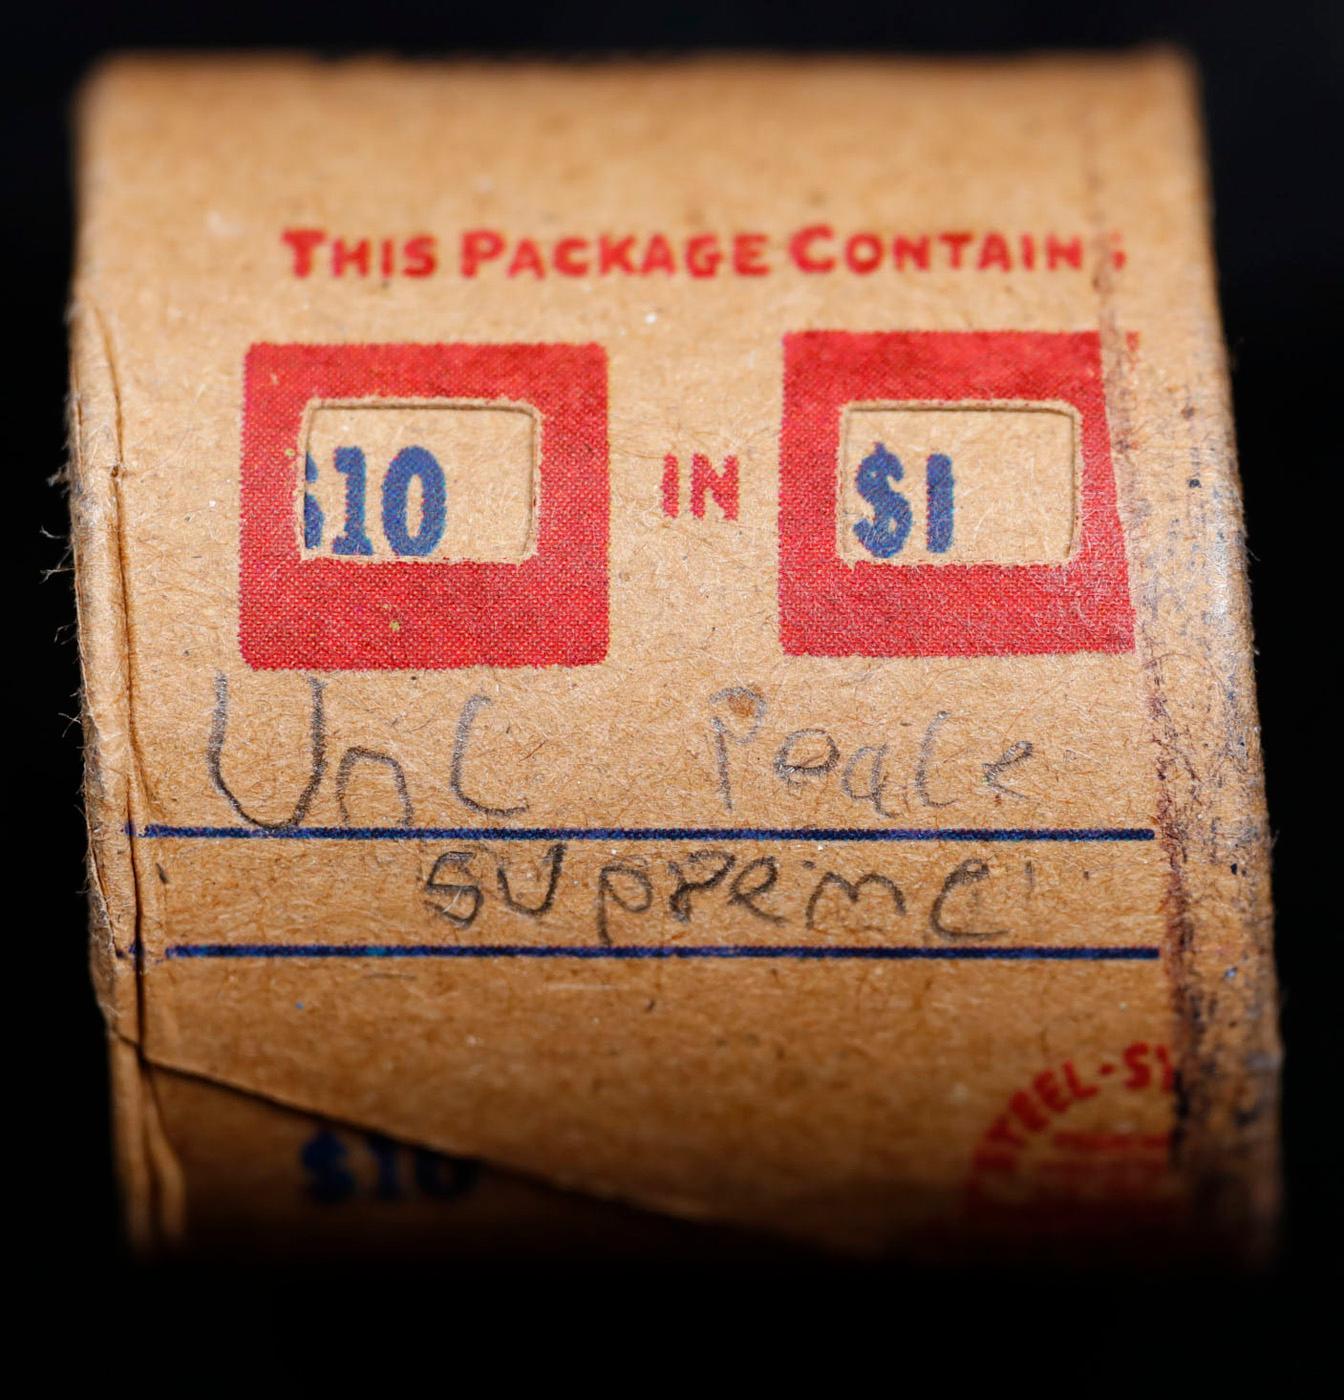 High Value! - Covered End Roll - Marked "Unc Peace Supreme" - Weight shows x10 Coins (FC)